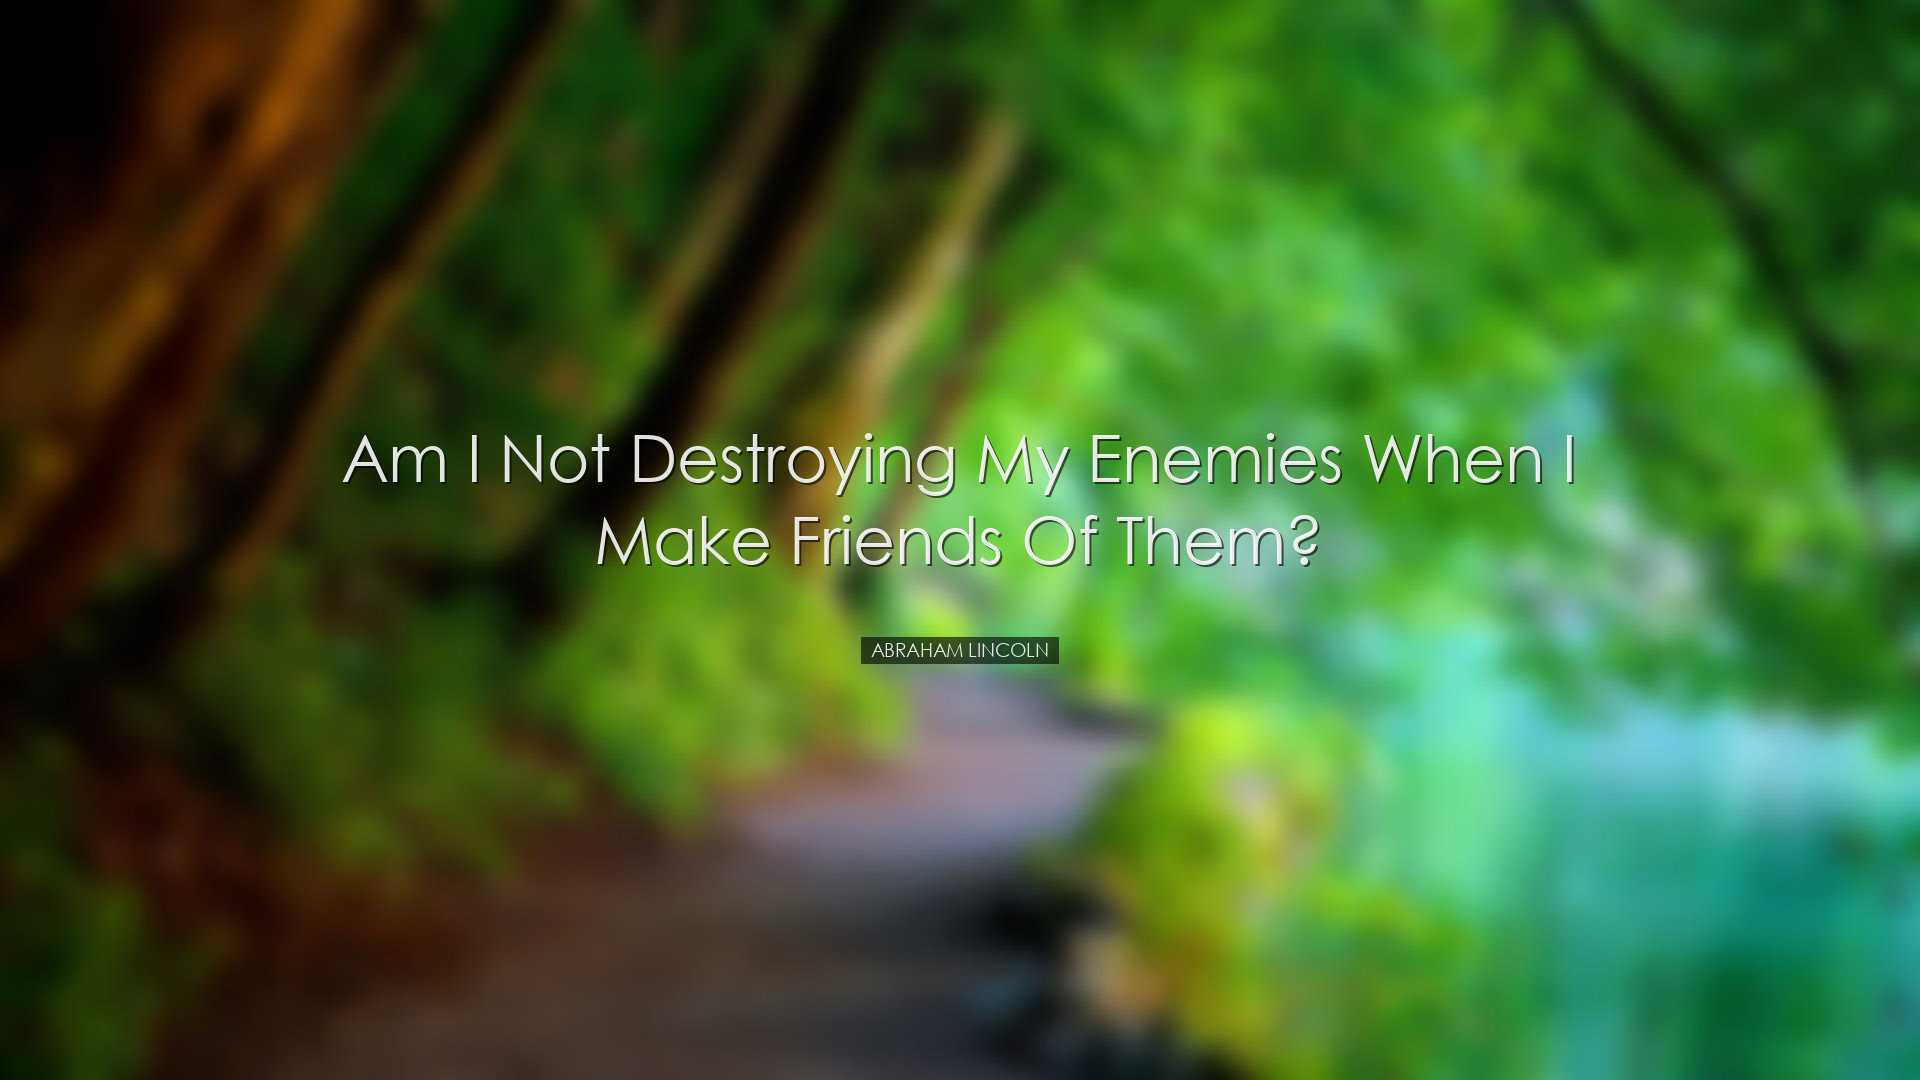 Am I not destroying my enemies when I make friends of them? - Abra